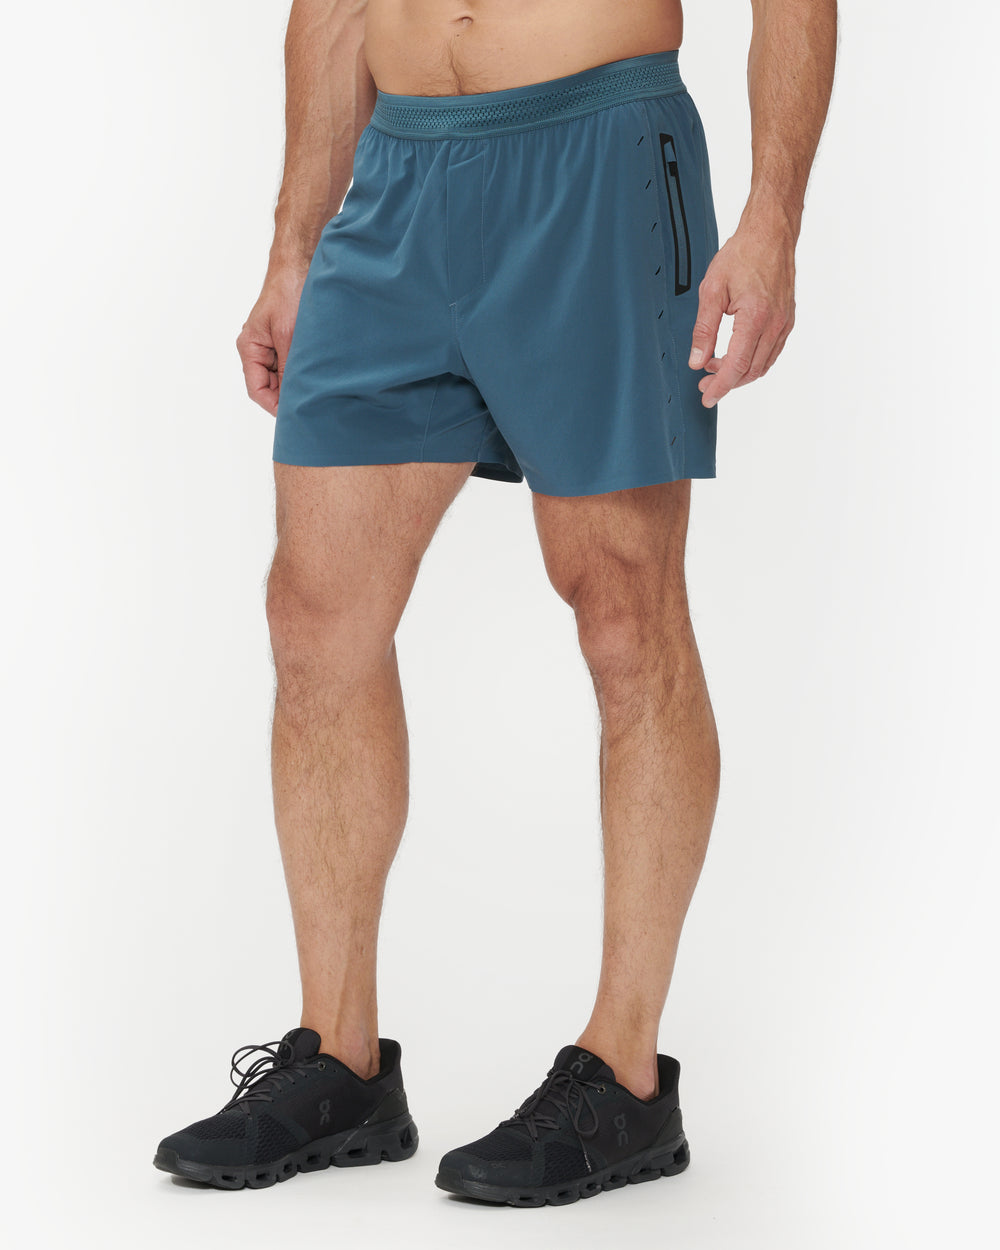 Ten Thousand Session Short 5" Unlined